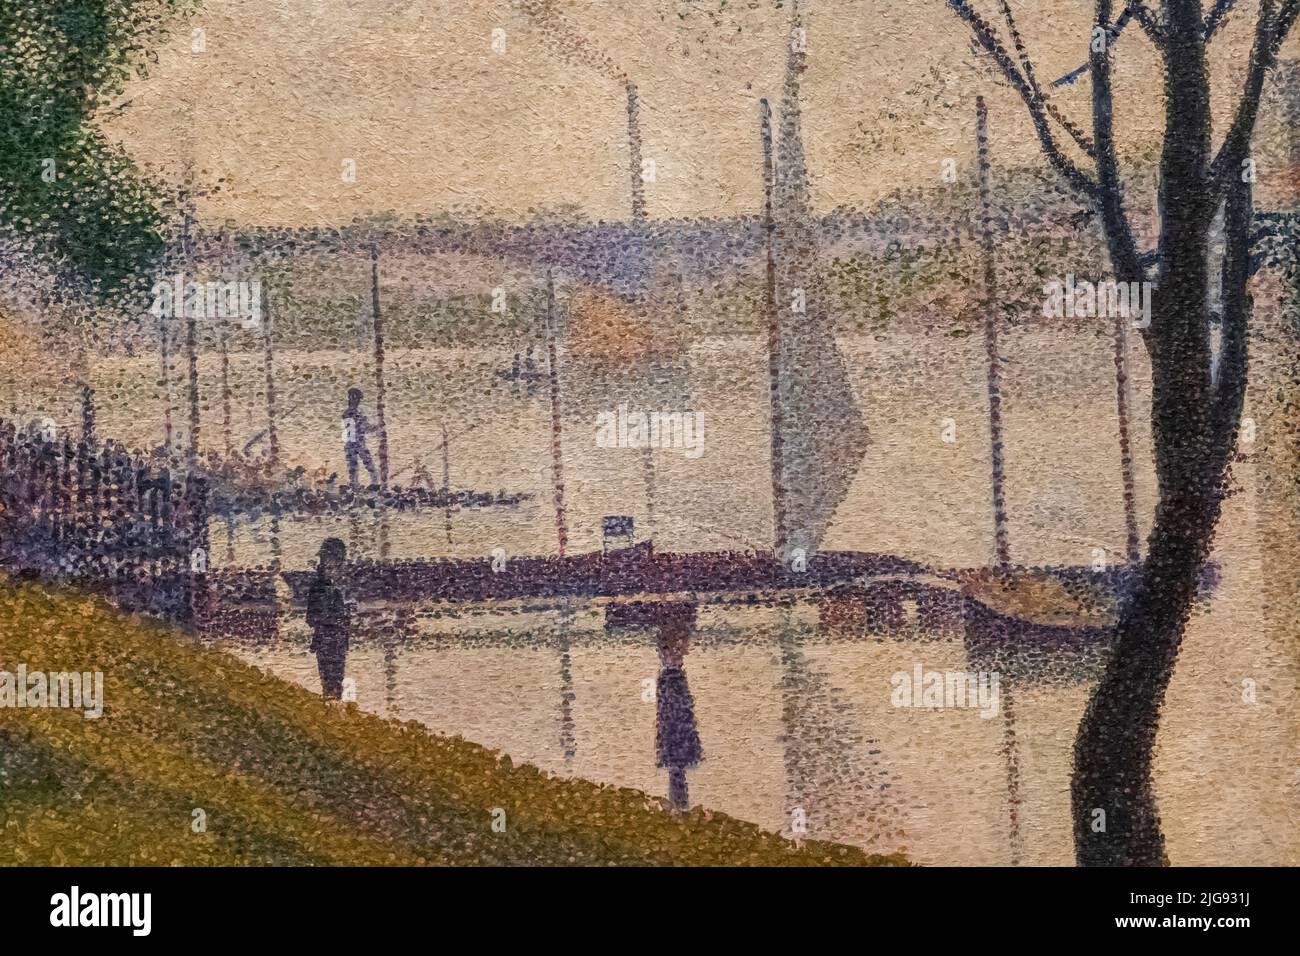 England, London, Somerset House, The Courtauld Gallery, Painting titled 'The Bridge at Courbevoie' by Georges Seurat dated 1886 Stock Photo